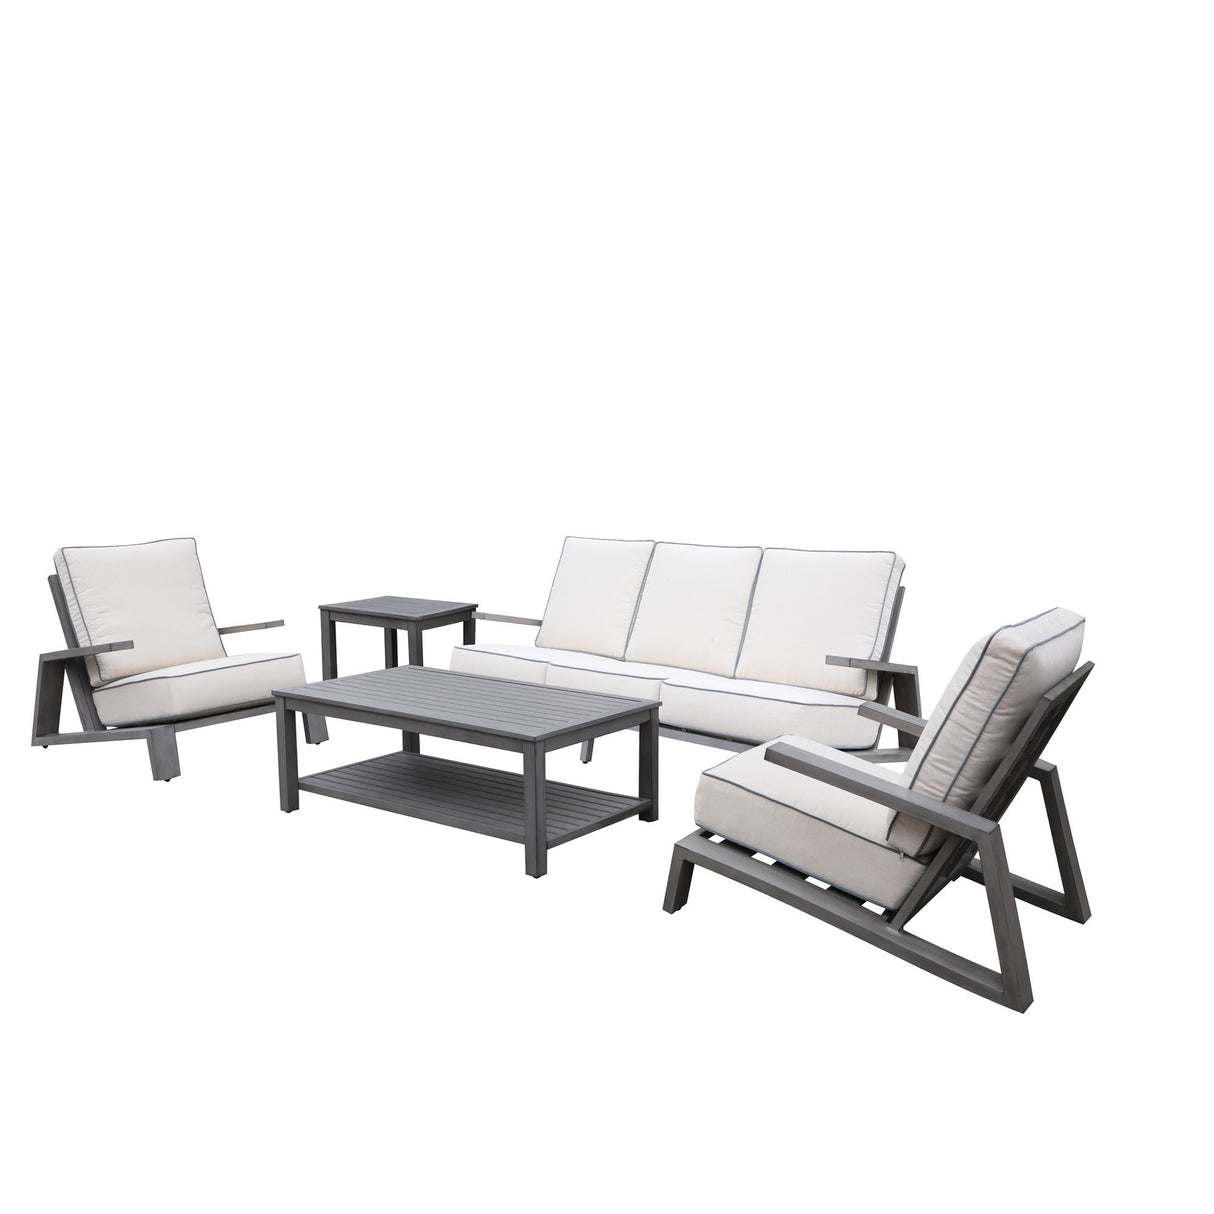 Octavia All-Weather Outdoor, Patio 5-Piece Aluminum Deep Seating Set with Water-Repellent Cushions for Deck, Backyards, Gardens, Lawns, Poolside, and Beach.